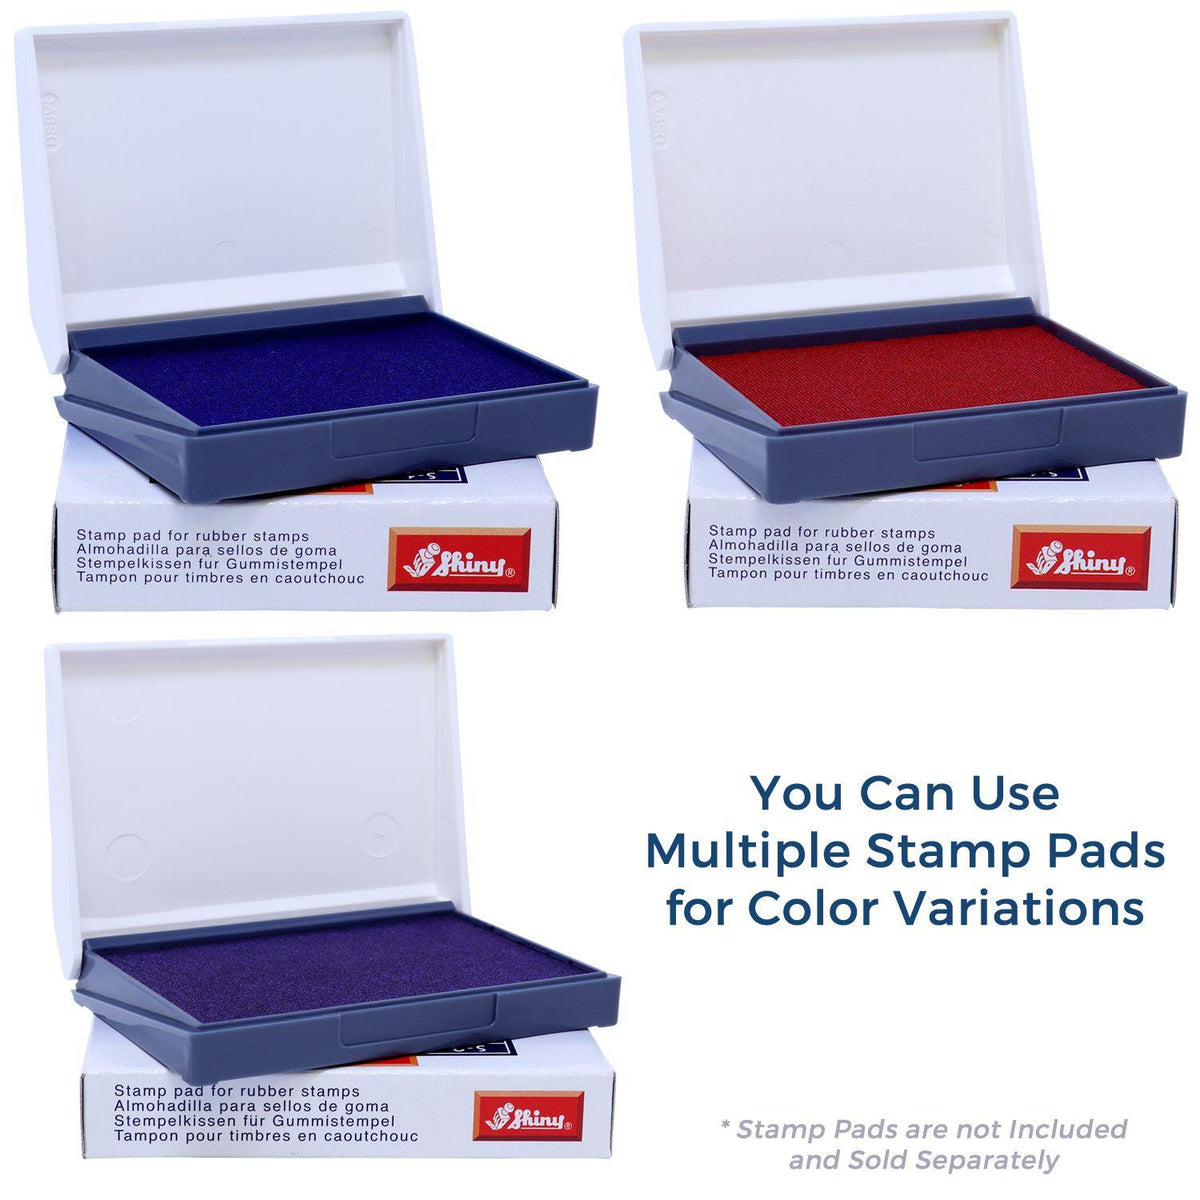 Stamp Pads for Blue Ribbon Rubber Stamp Available